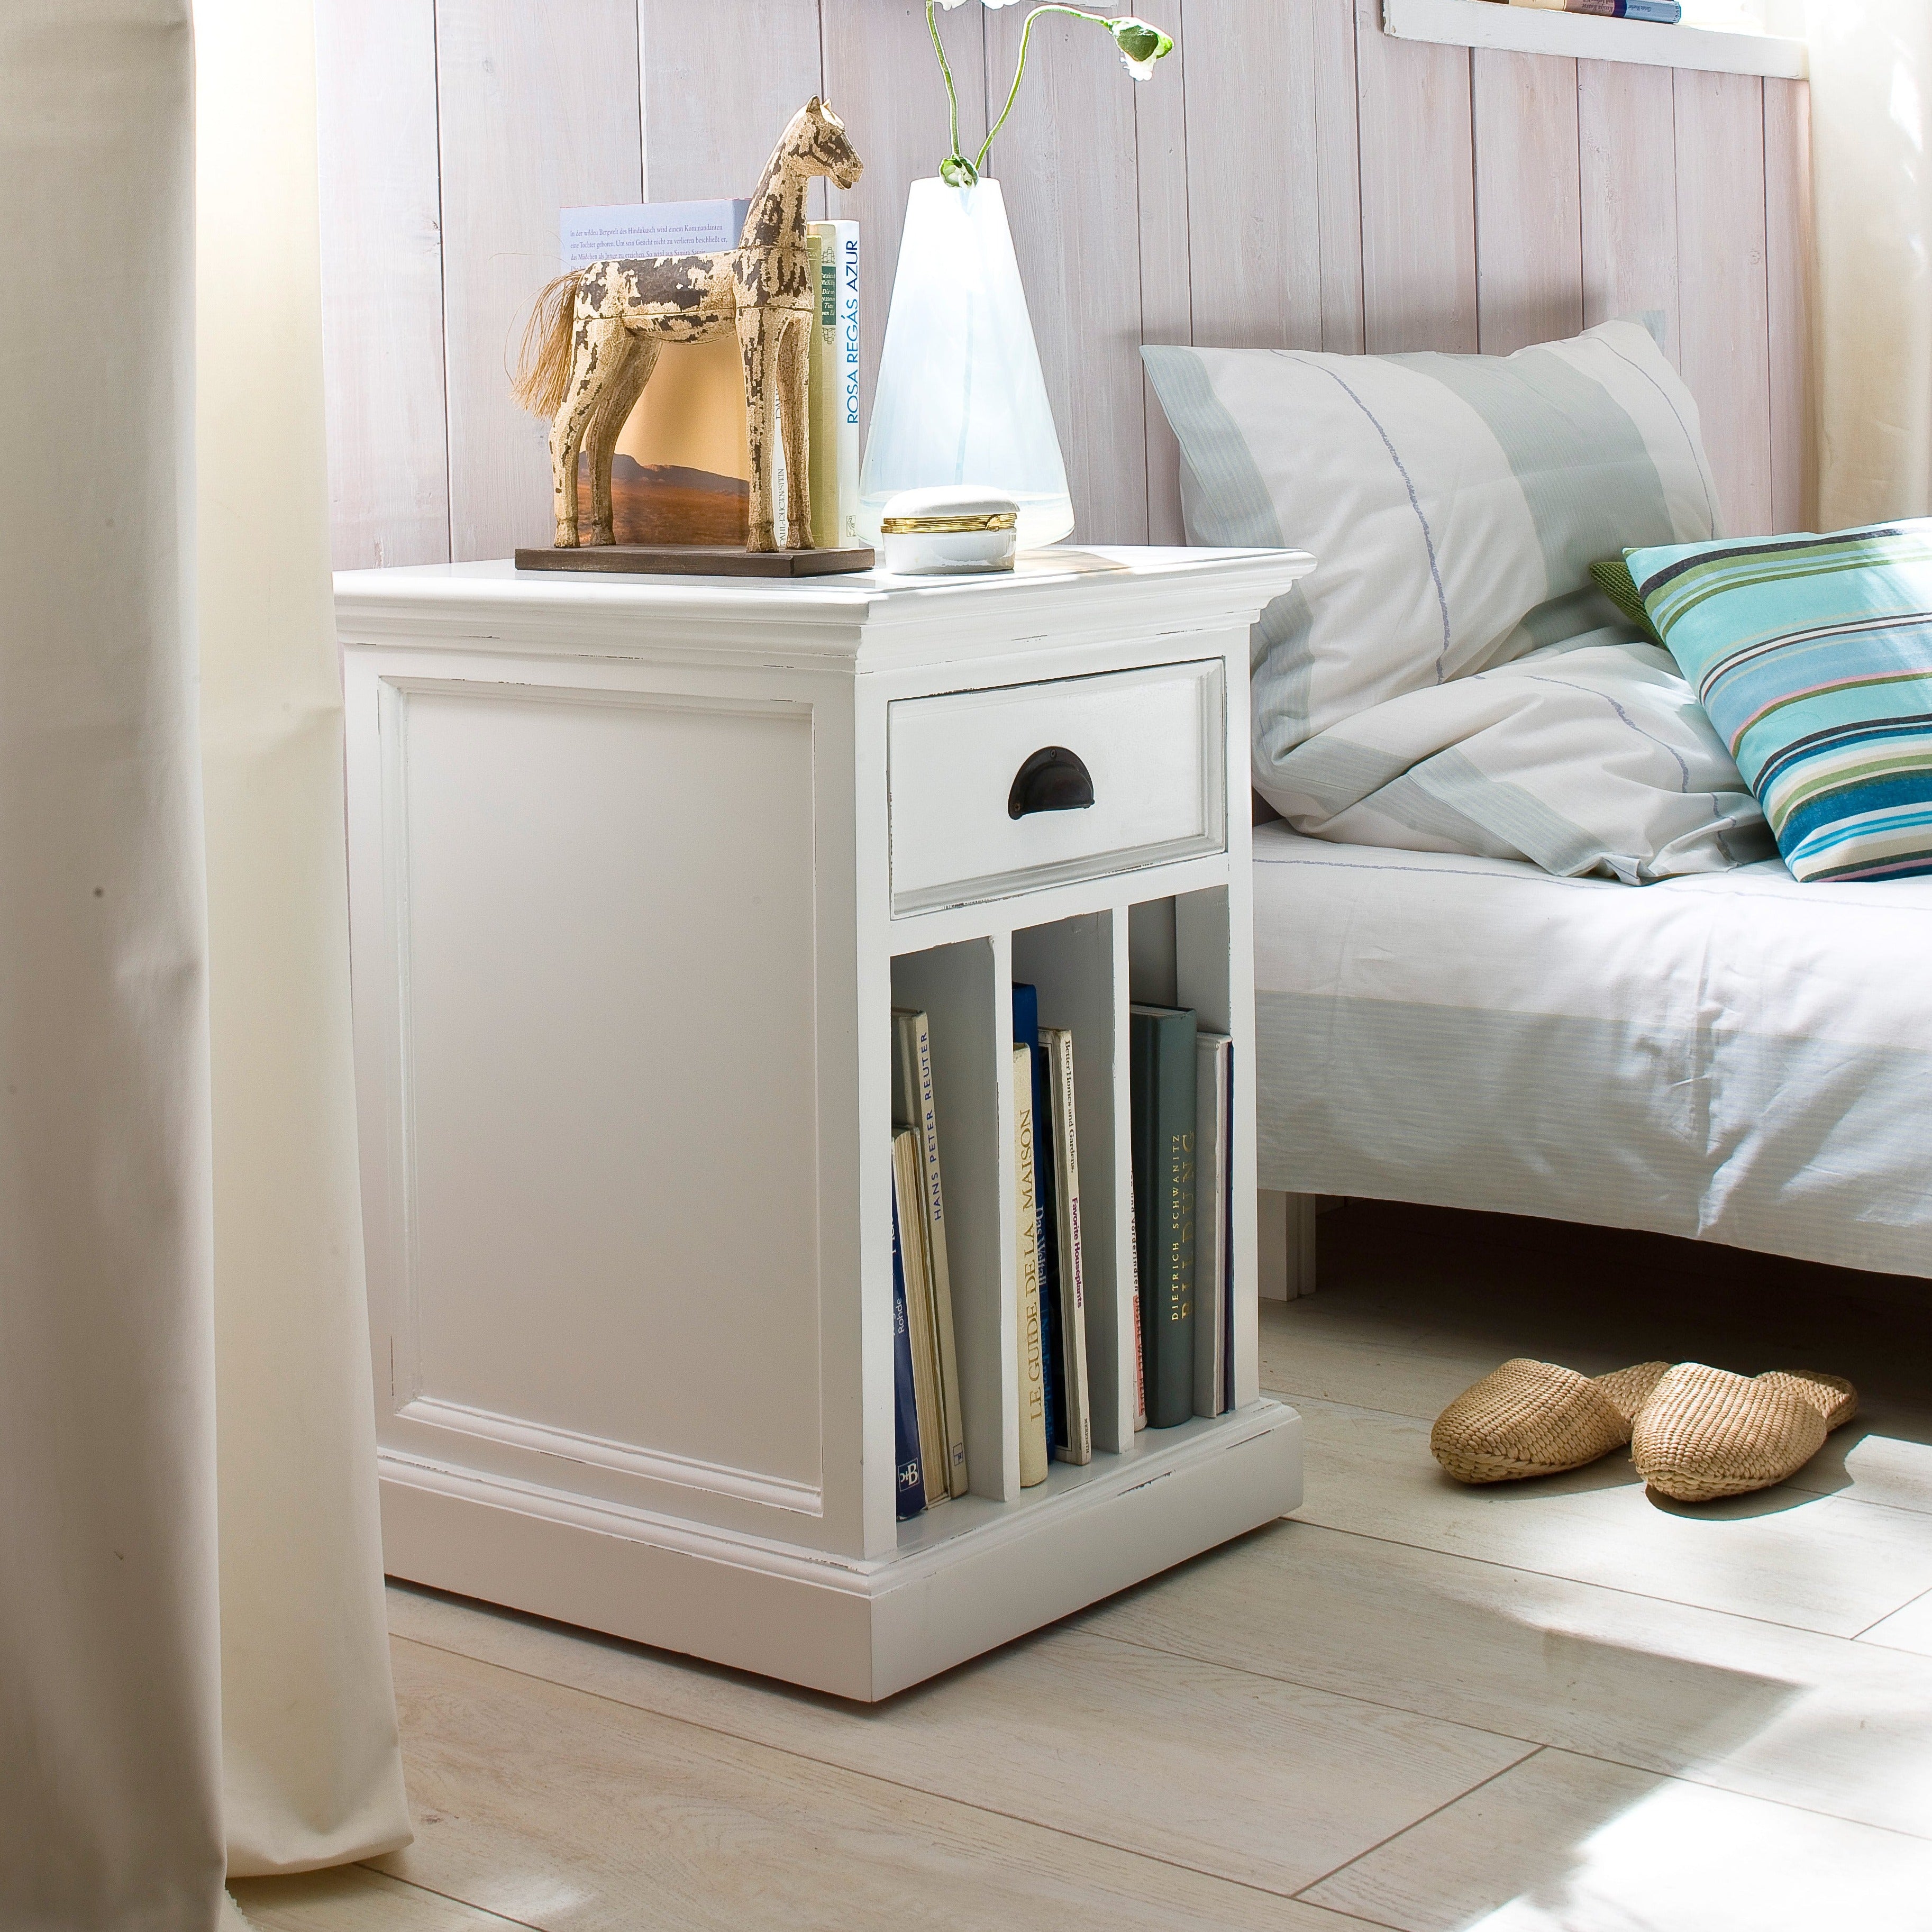 HALIFAX Bedside Table with Dividers Interior